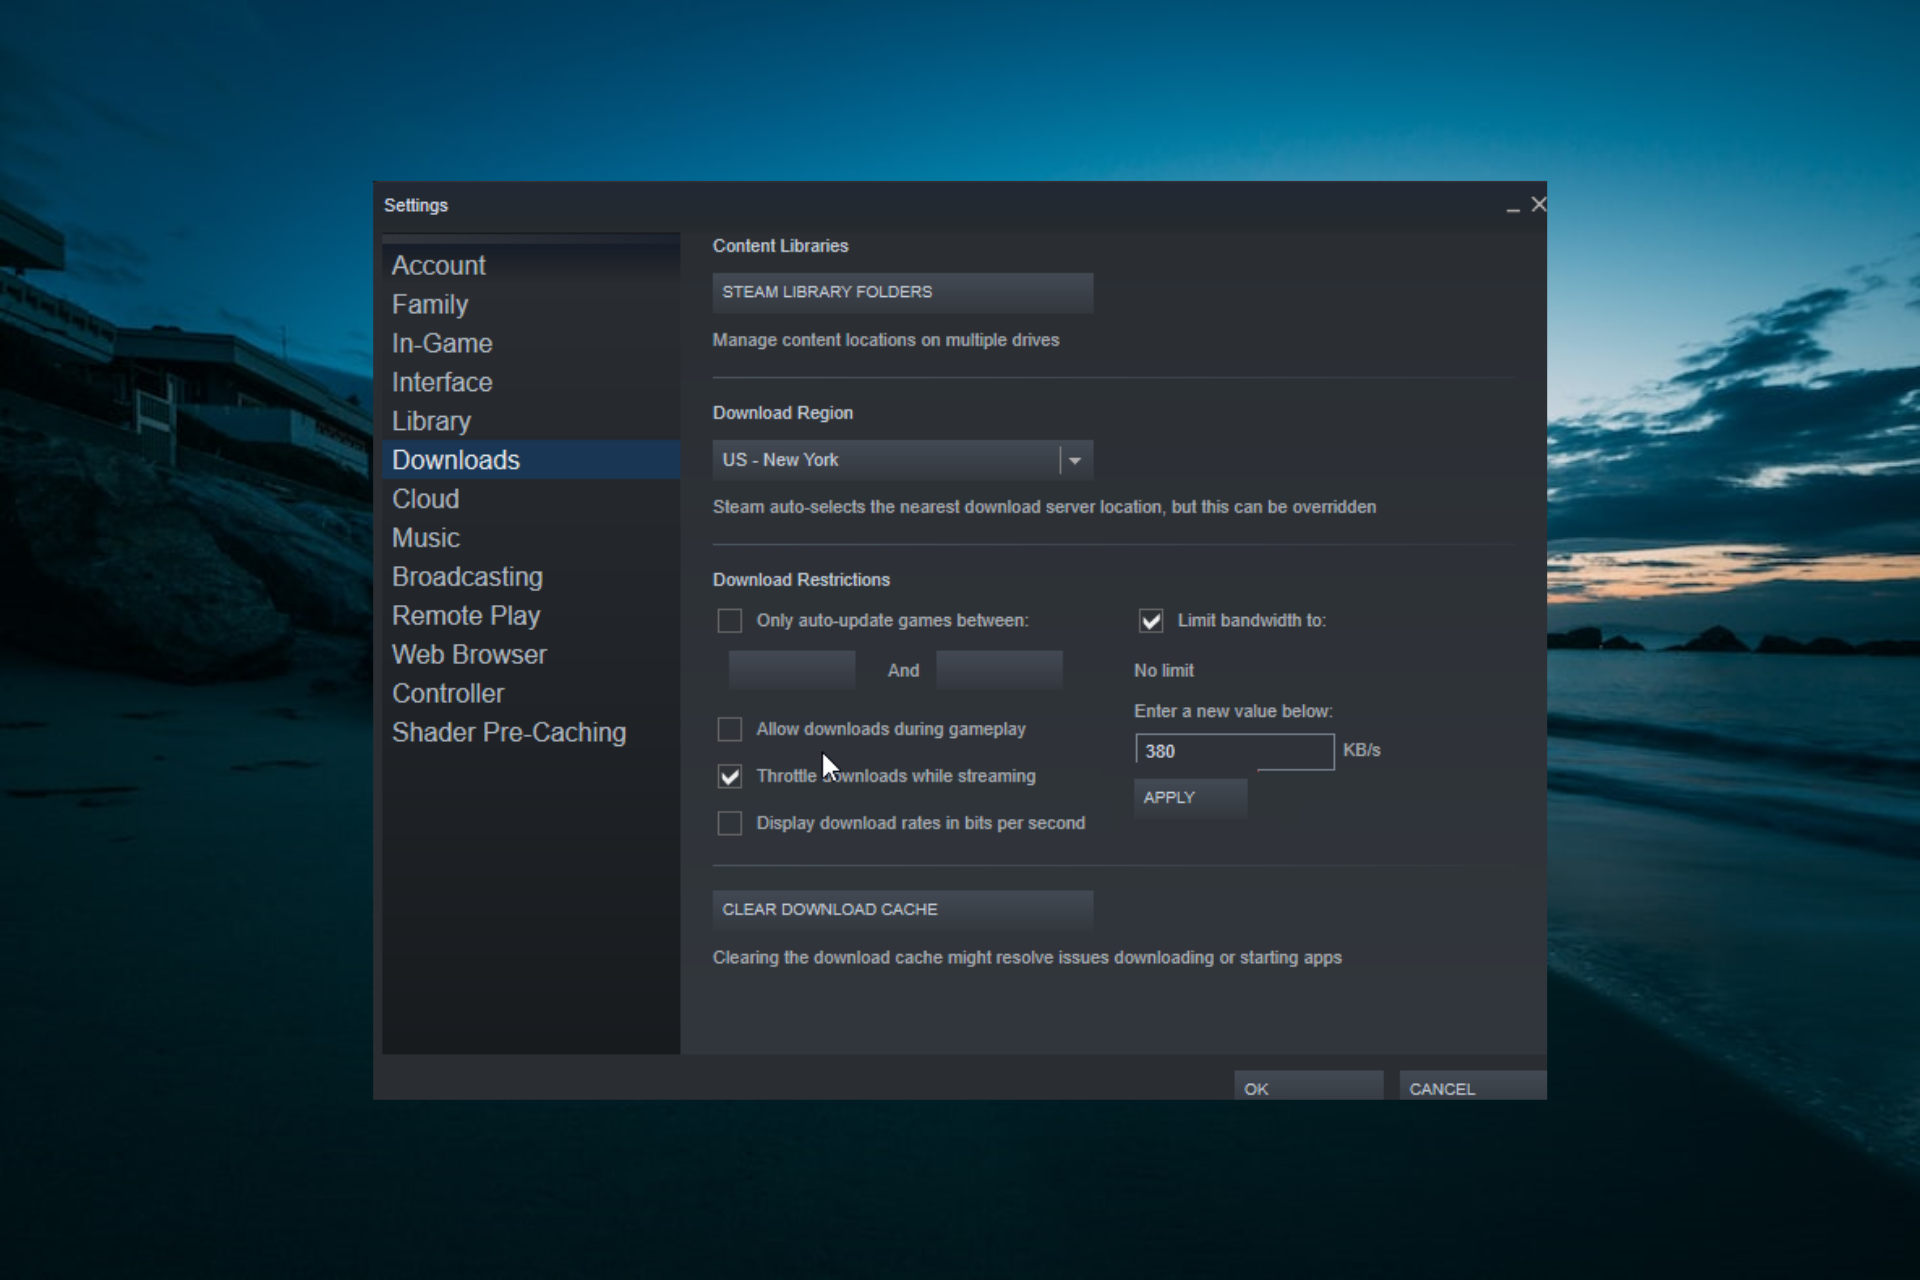 How to Use Steam to Download Files From the Internet